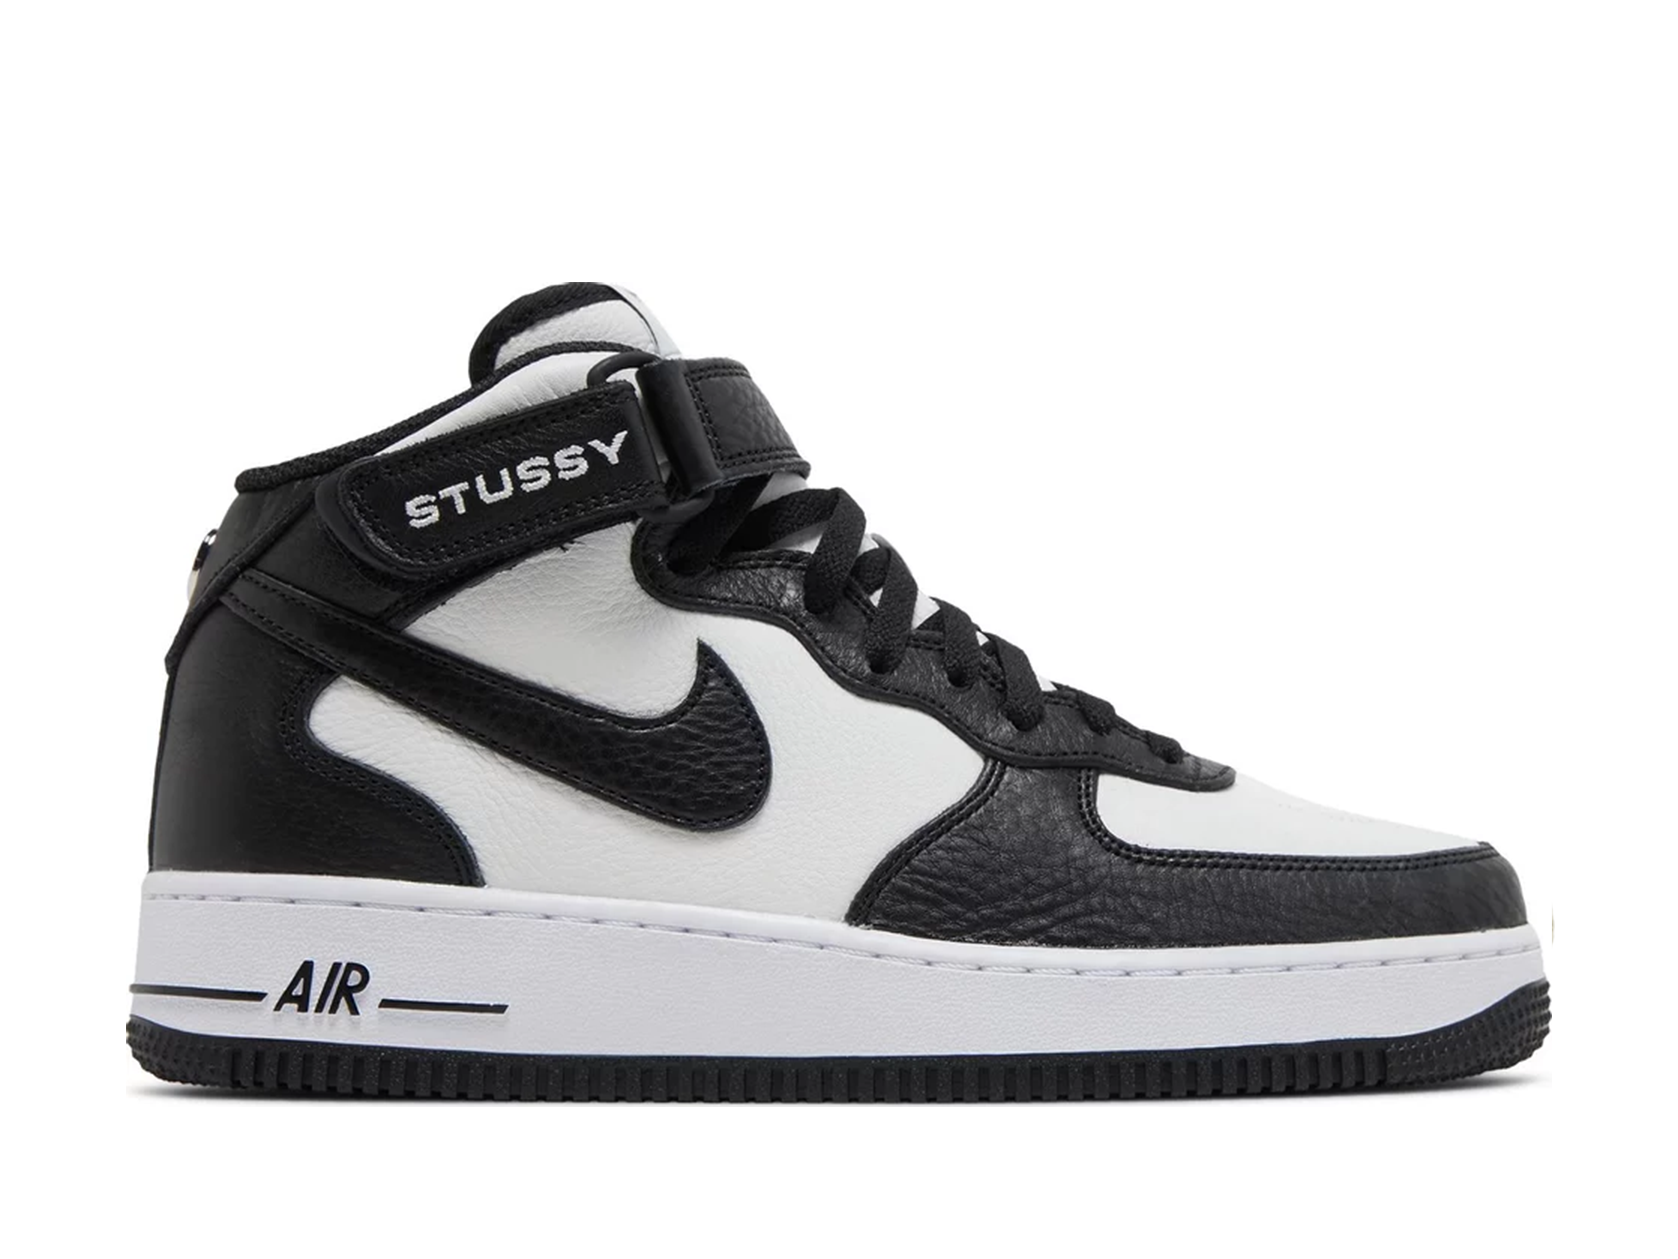 Double Boxed  224.99 Stussy x Nike Air Force 1 Mid Light Bone Black Double Boxed